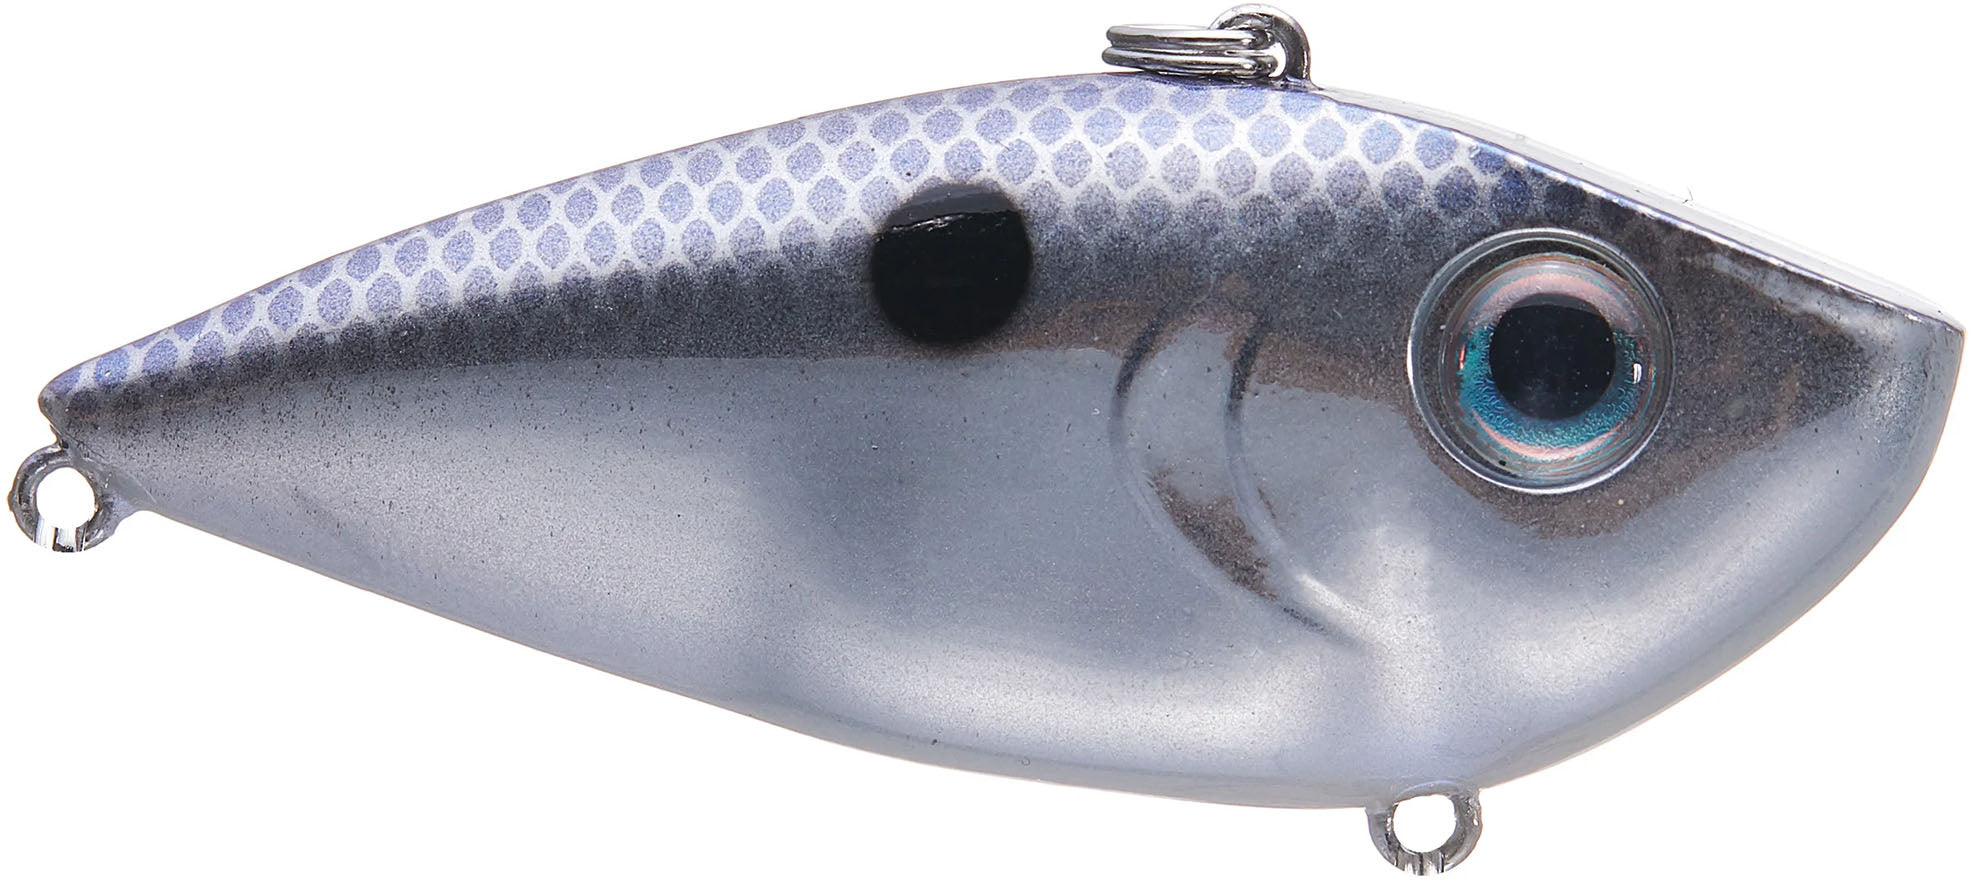 Strike King Red Eyed Shad Lipless Crankbait - 2.25 Inch — Discount